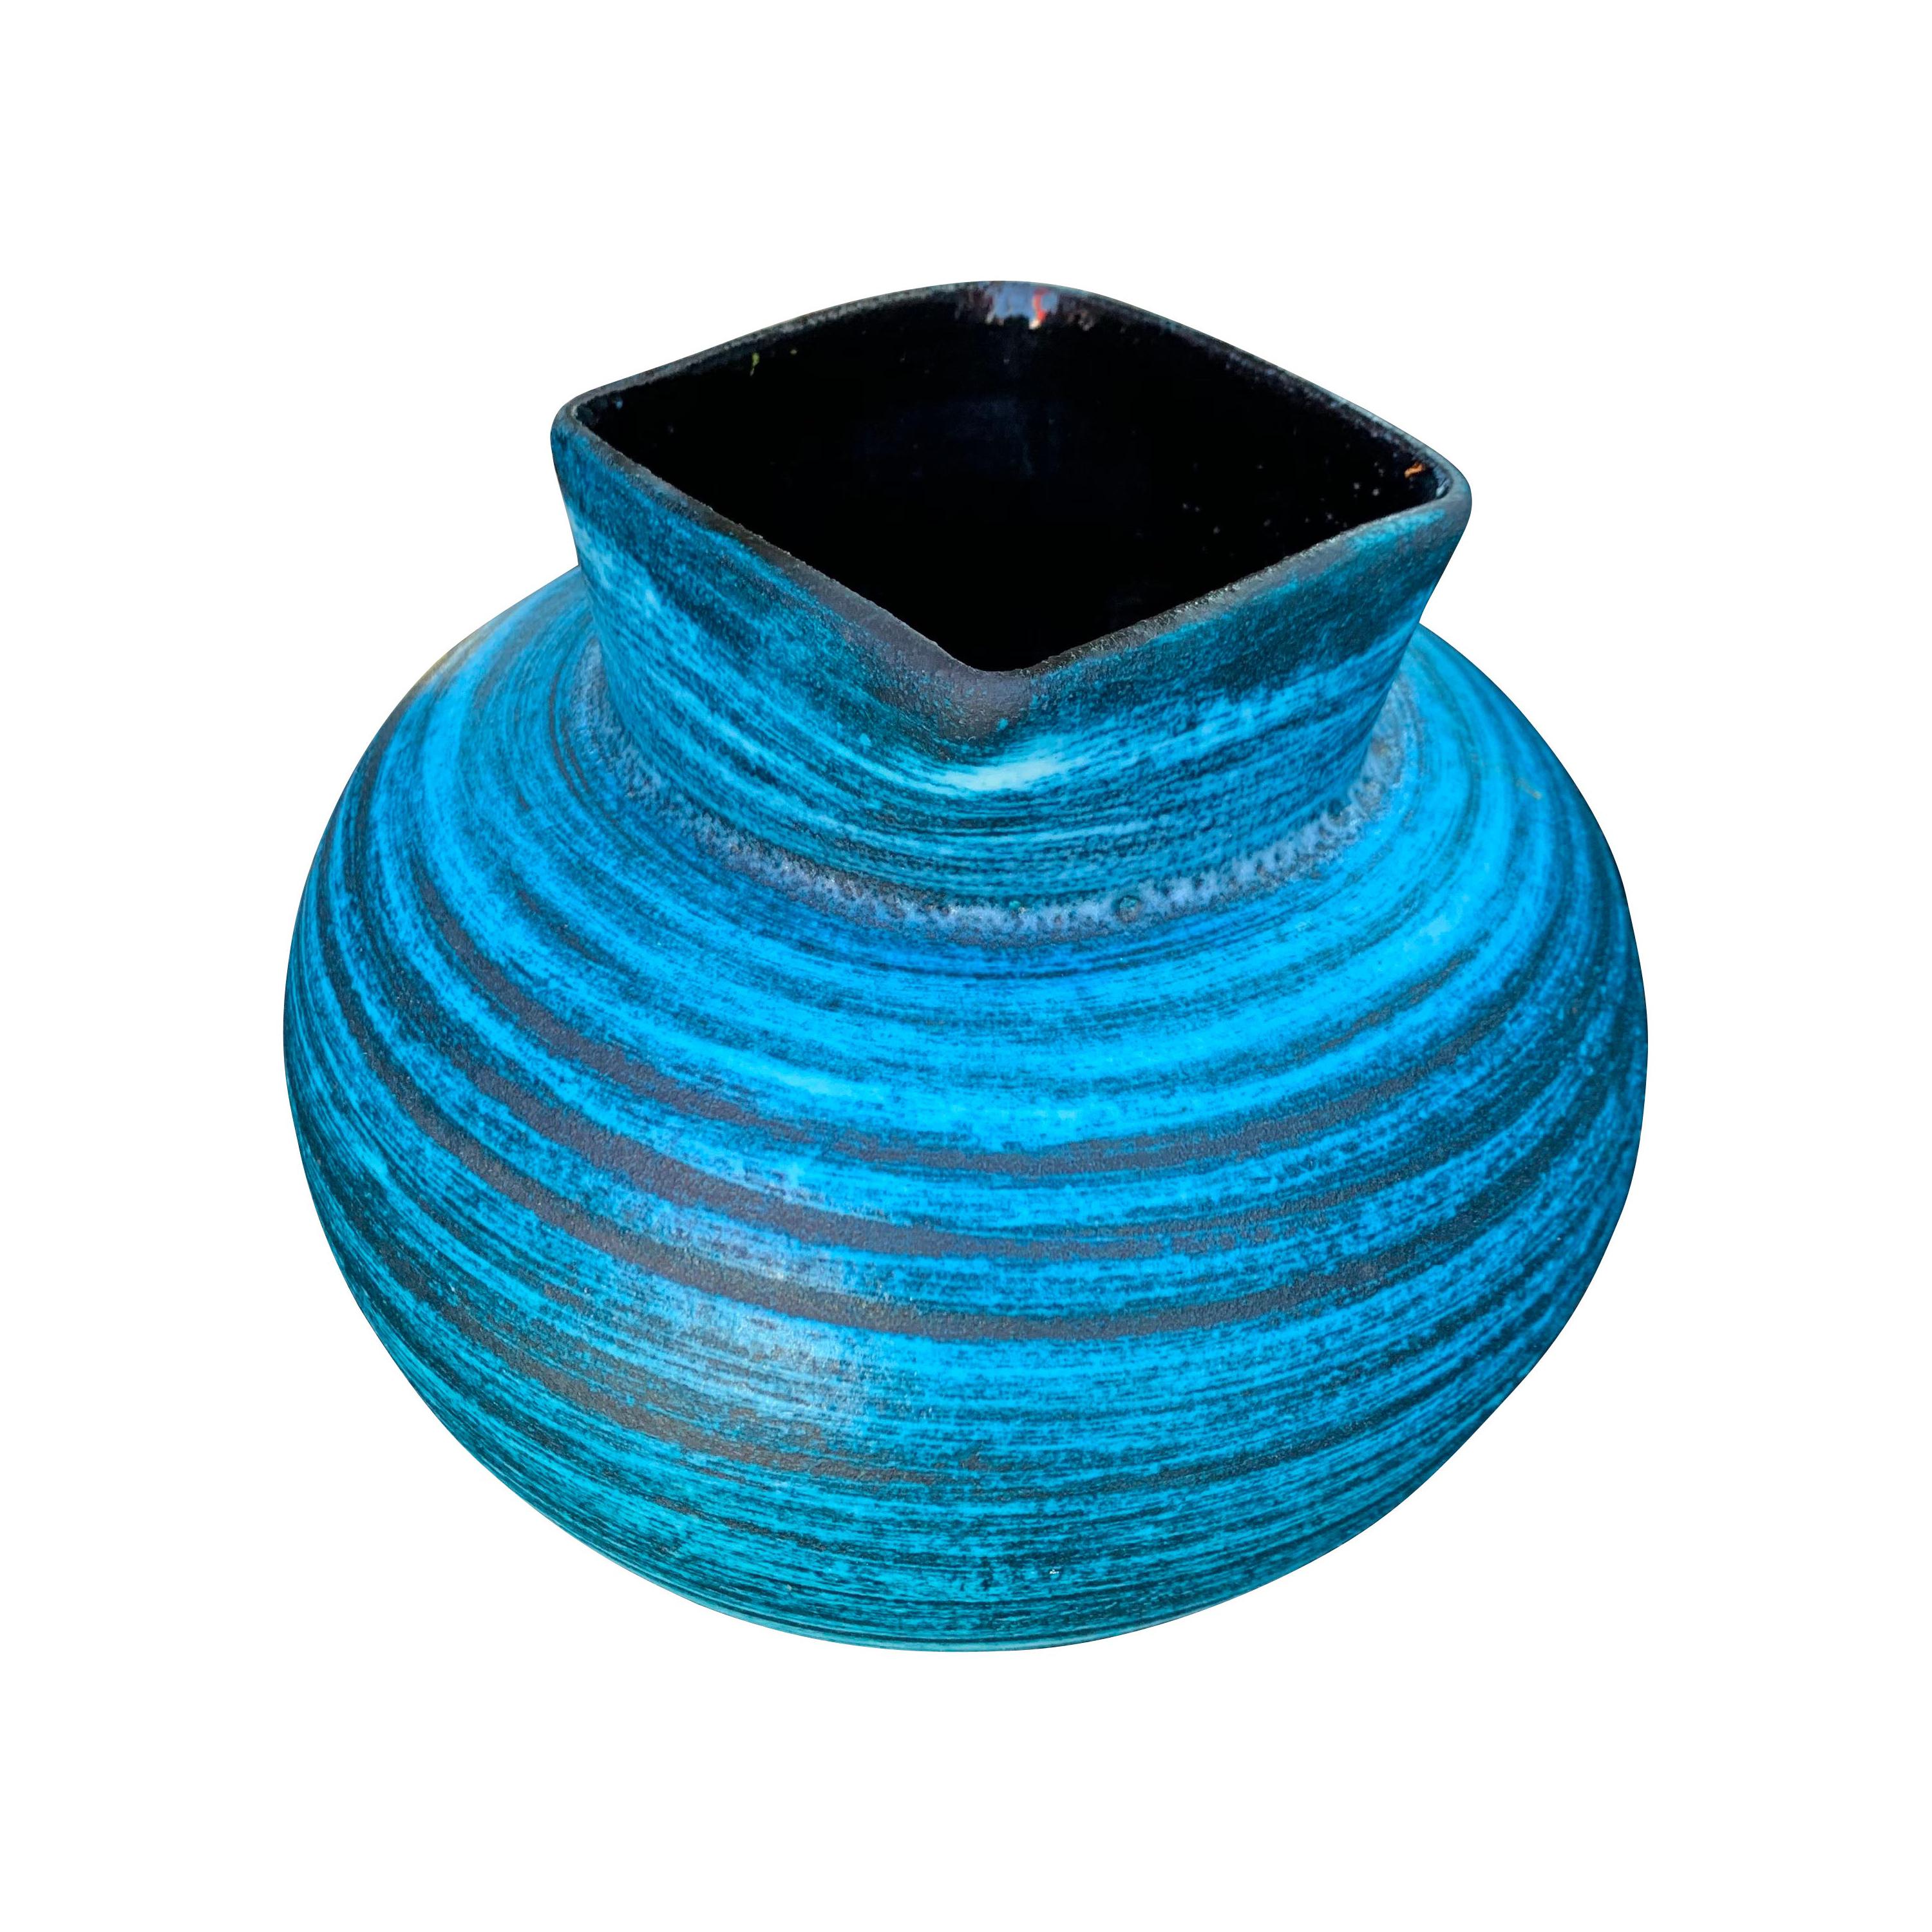 Blue And Grey Accolay Vase, France, Midcentury